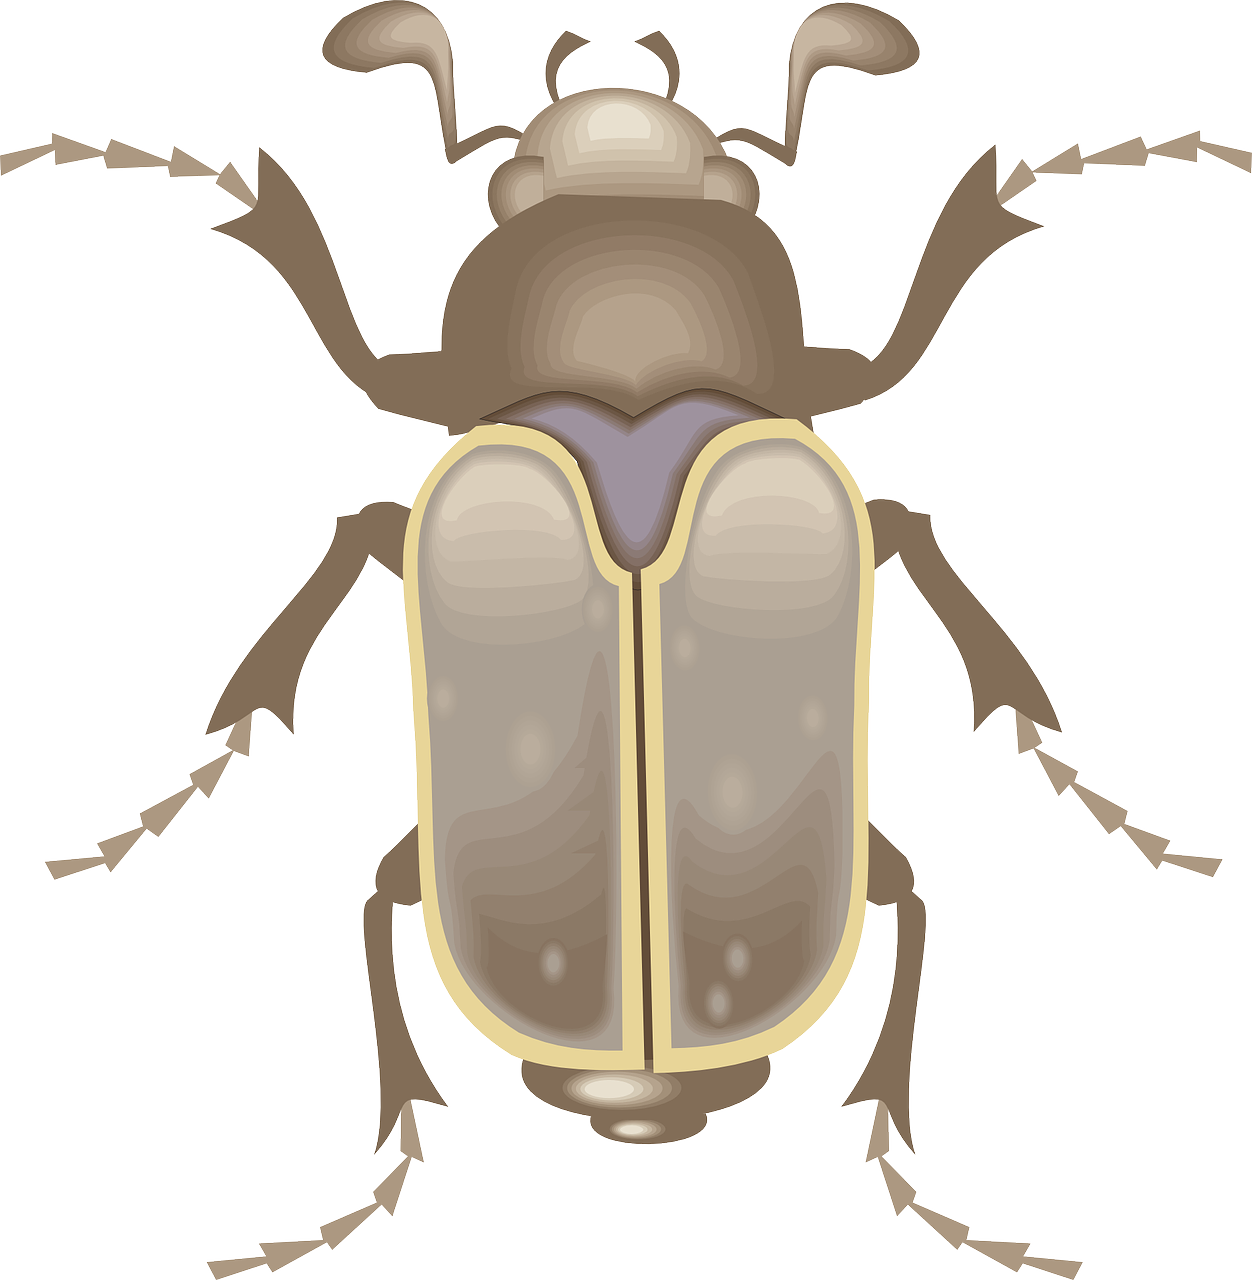 top,view,wings,insect,beetle,legs,free vector graphics,free pictures, free photos, free images, royalty free, free illustrations, public domain